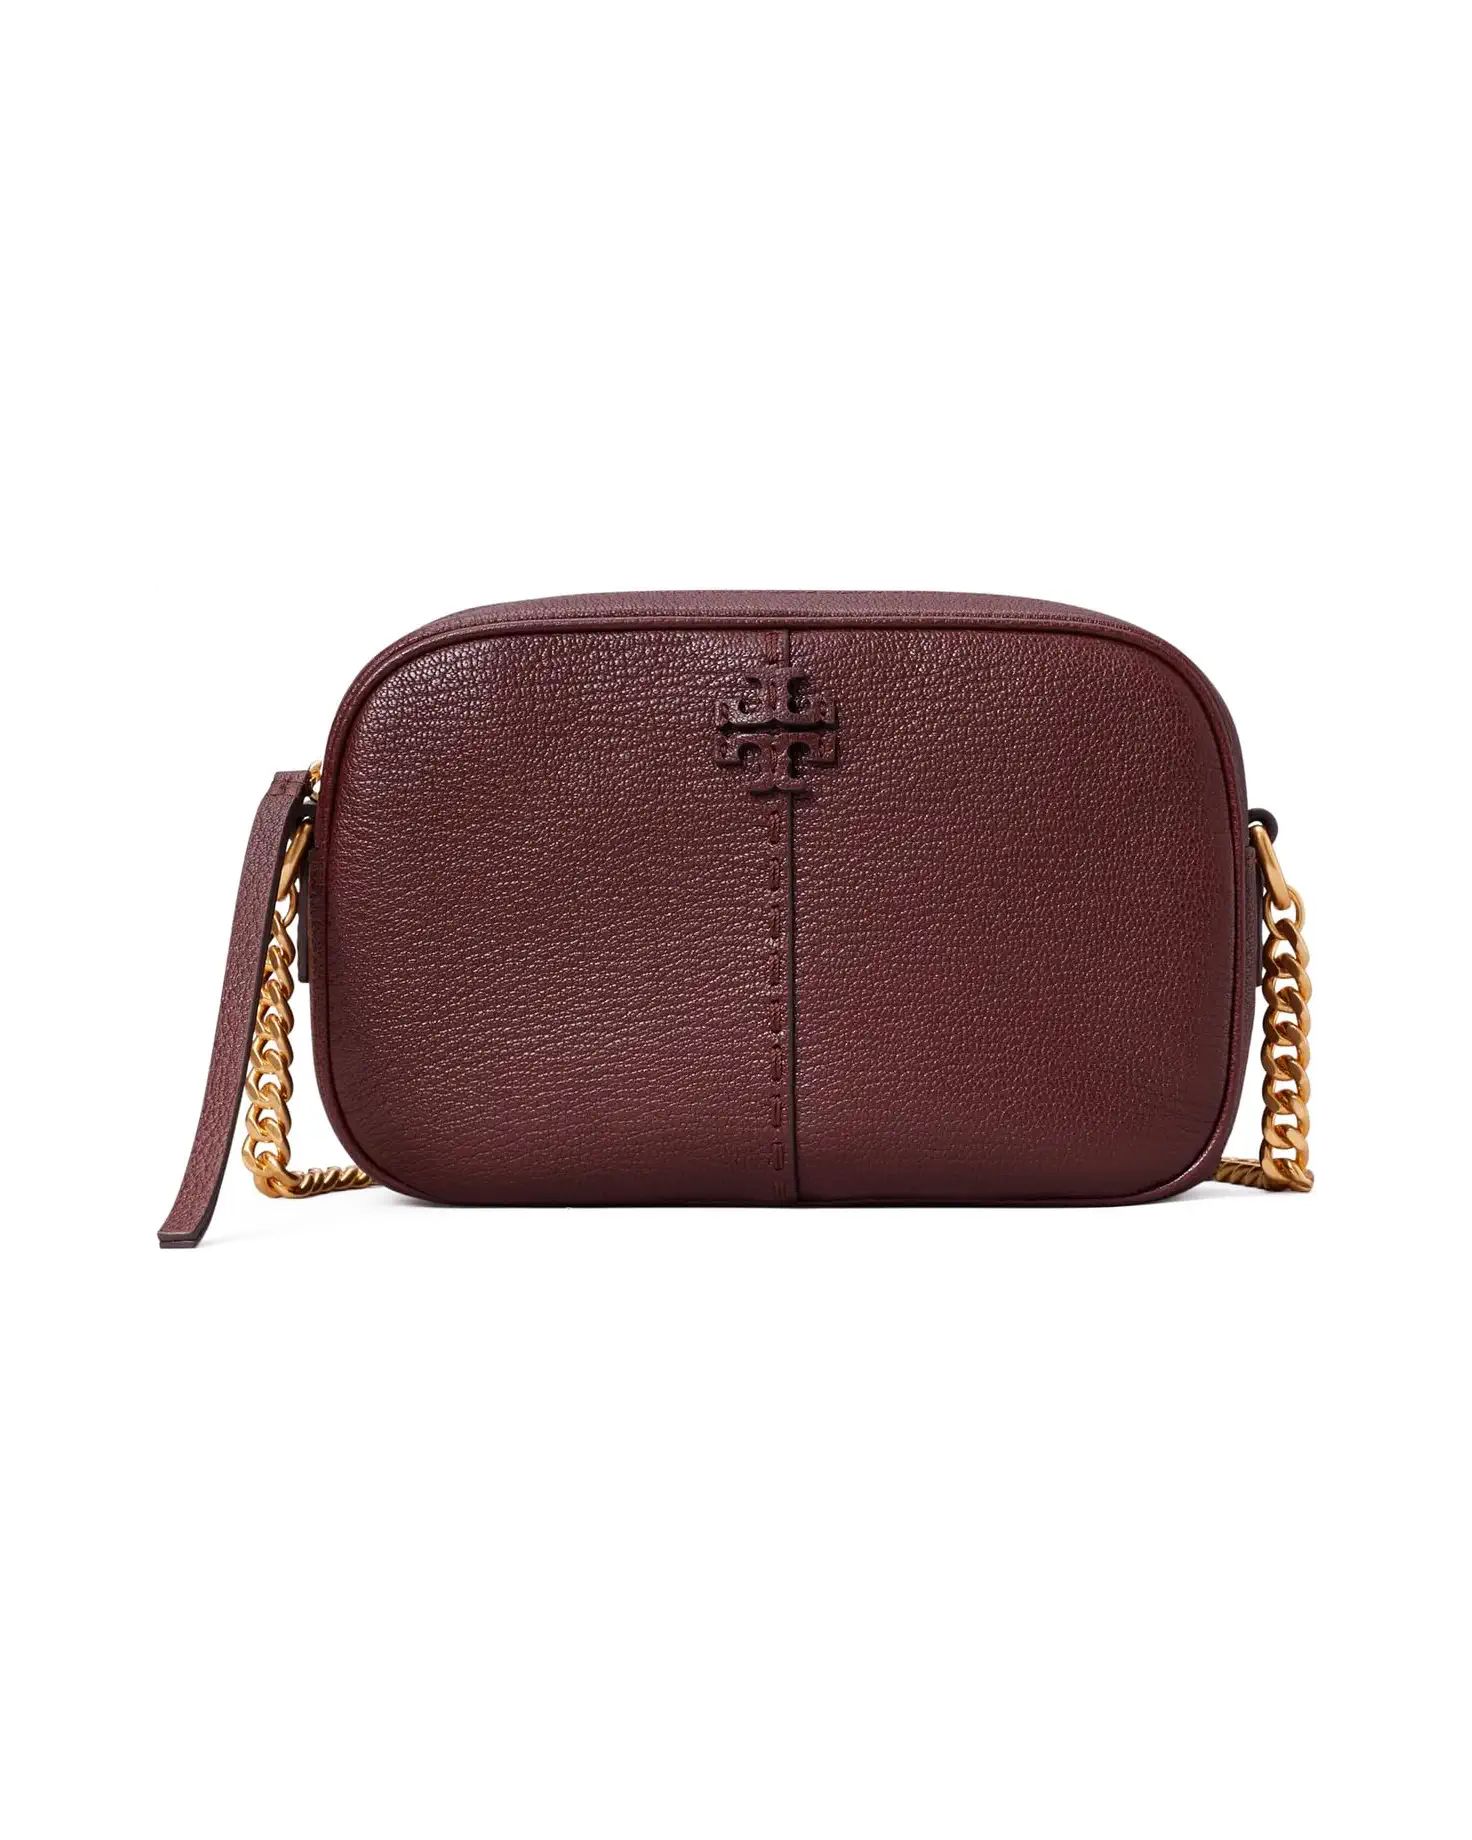 Tory Burch McGraw Textured Leather Camera Bag | Zappos